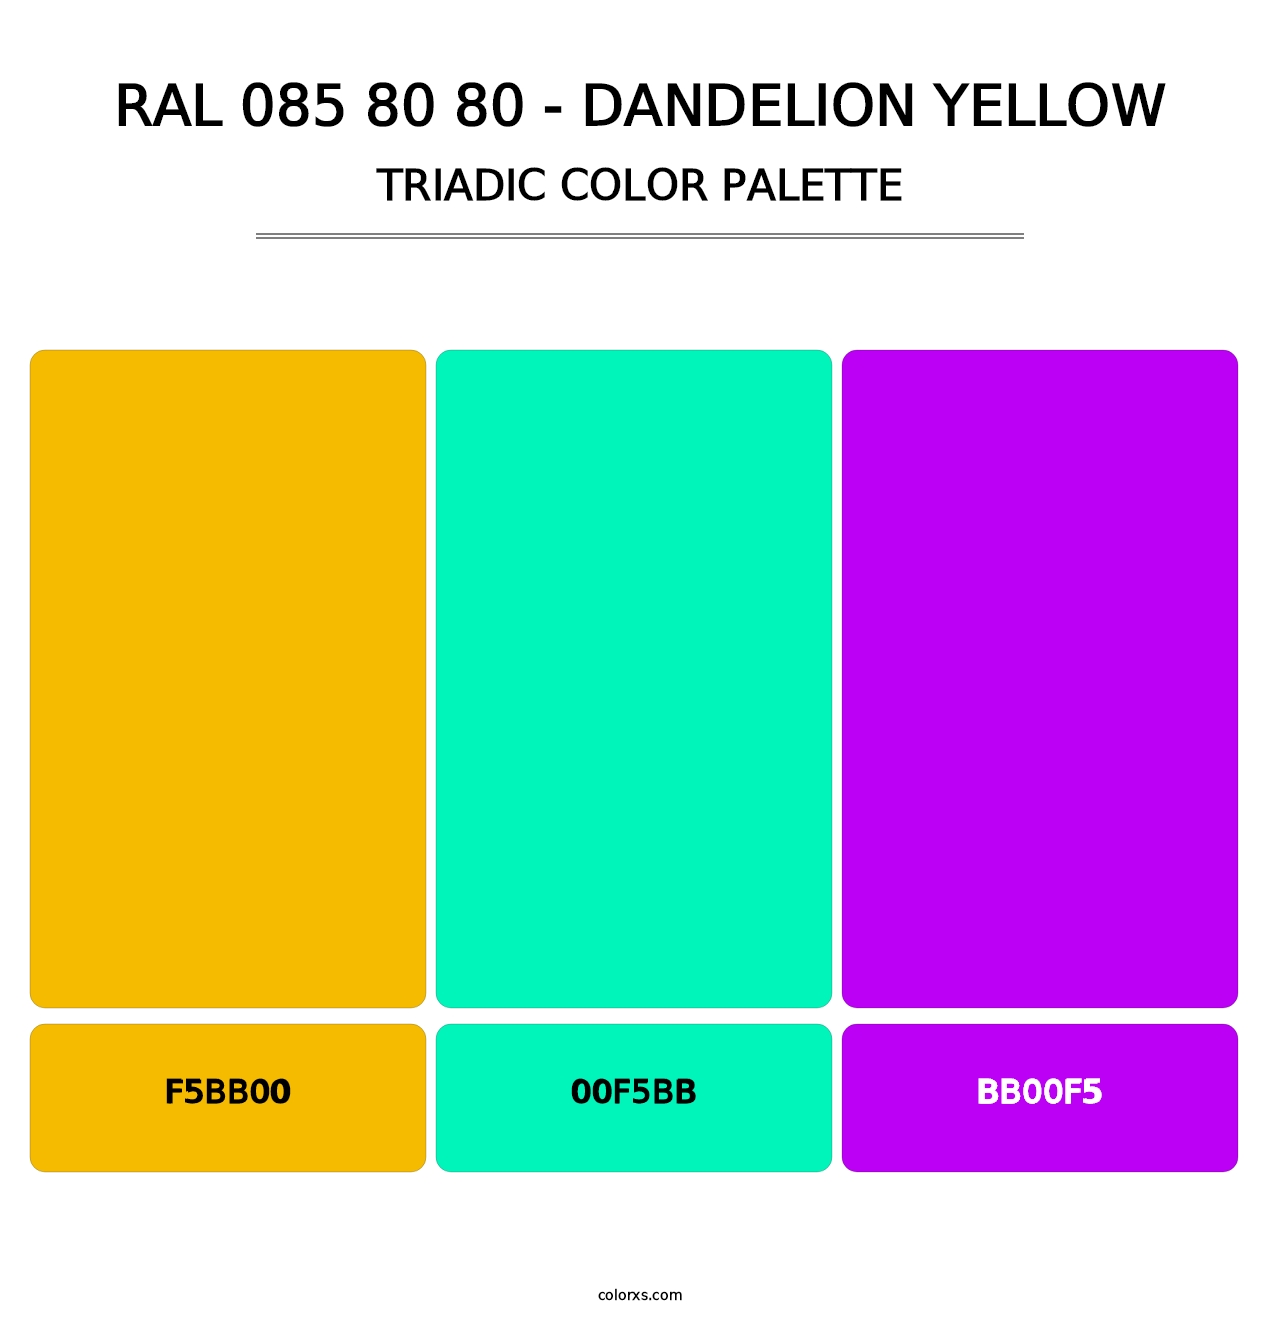 RAL 085 80 80 - Dandelion Yellow - Triadic Color Palette